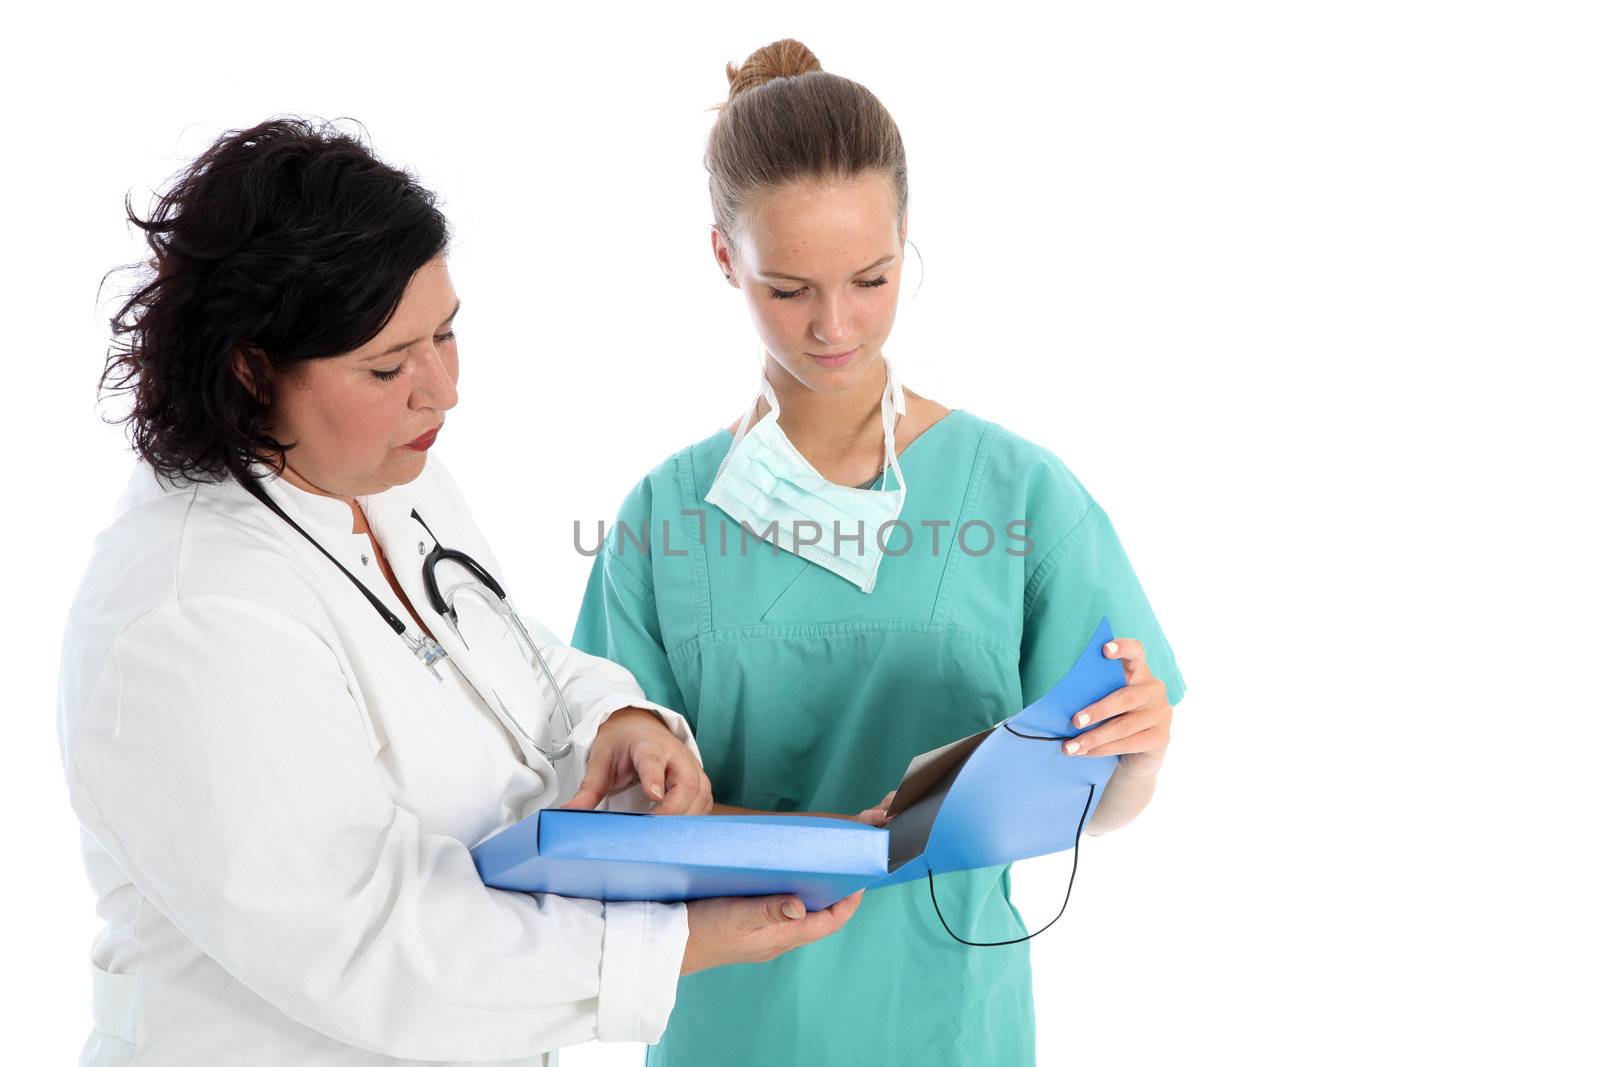 Doctor and nurse discussing patient records Doctor and nurse discussing patient records  by Farina6000